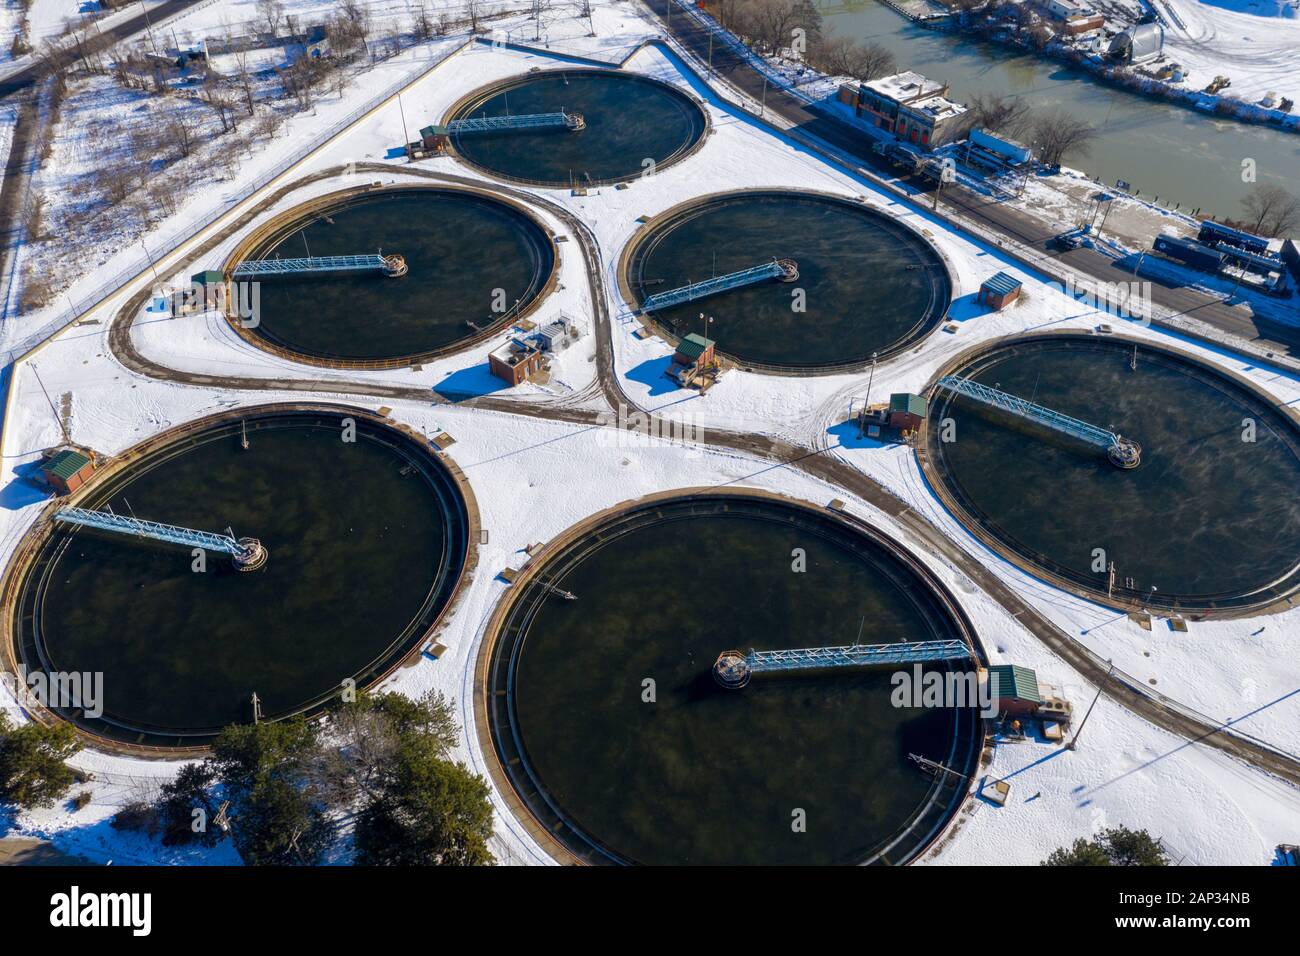 Detroit, Michigan - The Great Lakes Water Authority's sewage treatment plant, which serves Detroit and 76 other southeastern Michigan communities. The Stock Photo